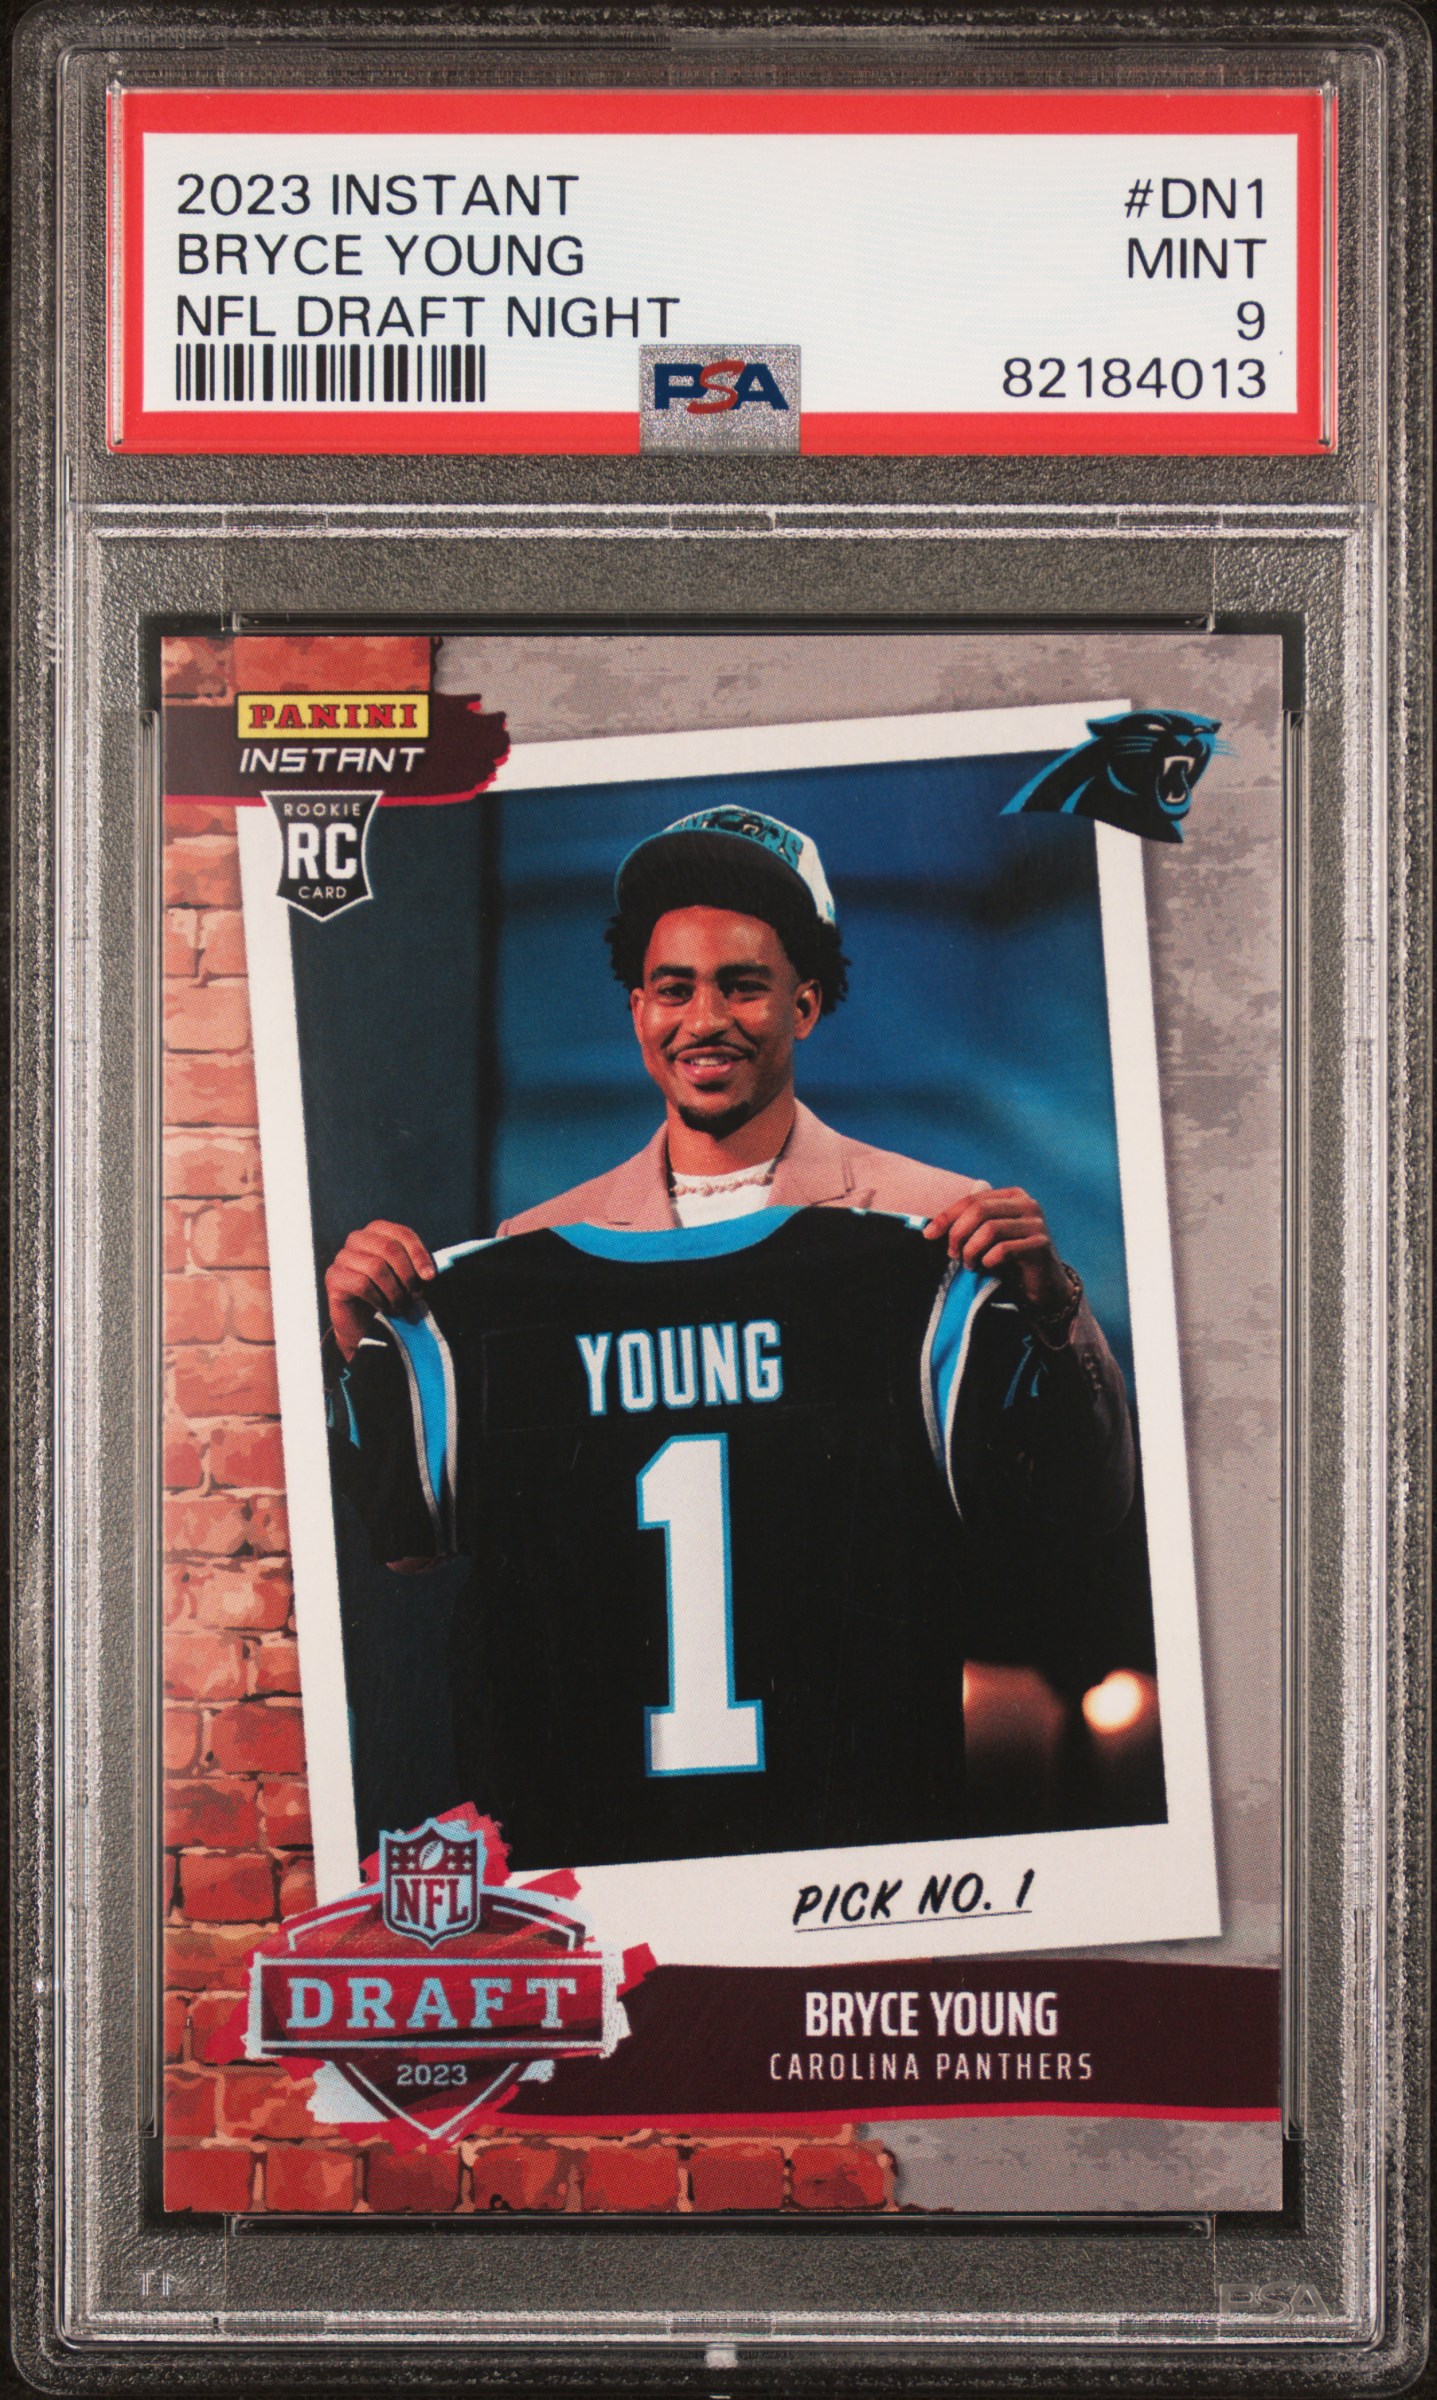 2023 Panini Instant NFL Draft Night #DN1 Bryce Young Rookie Card (/3659) – PSA MINT 9